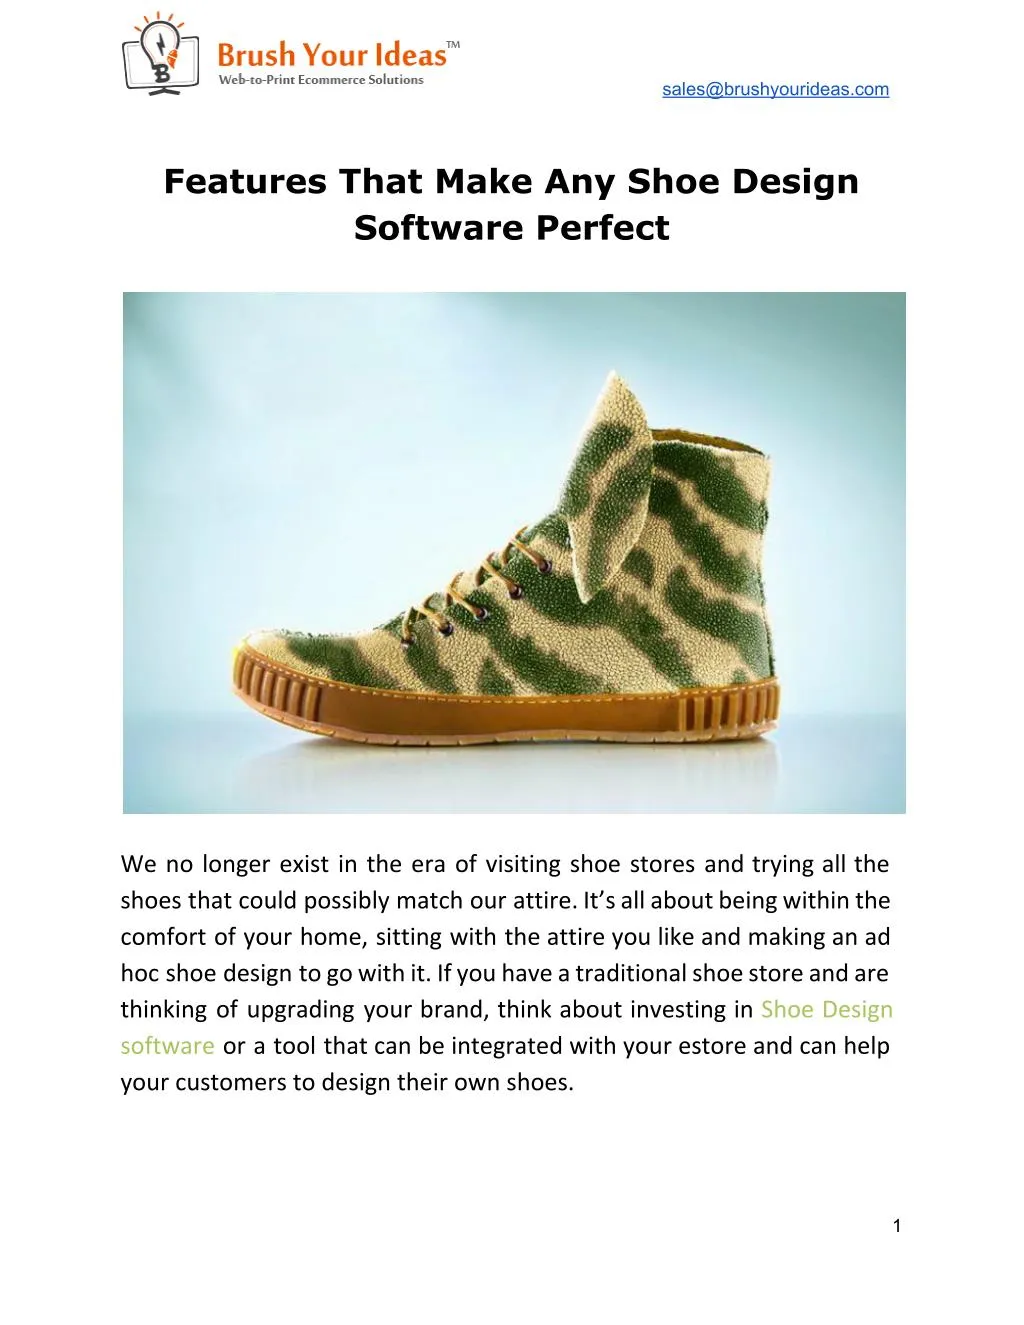 Share more than 135 sneaker design software latest